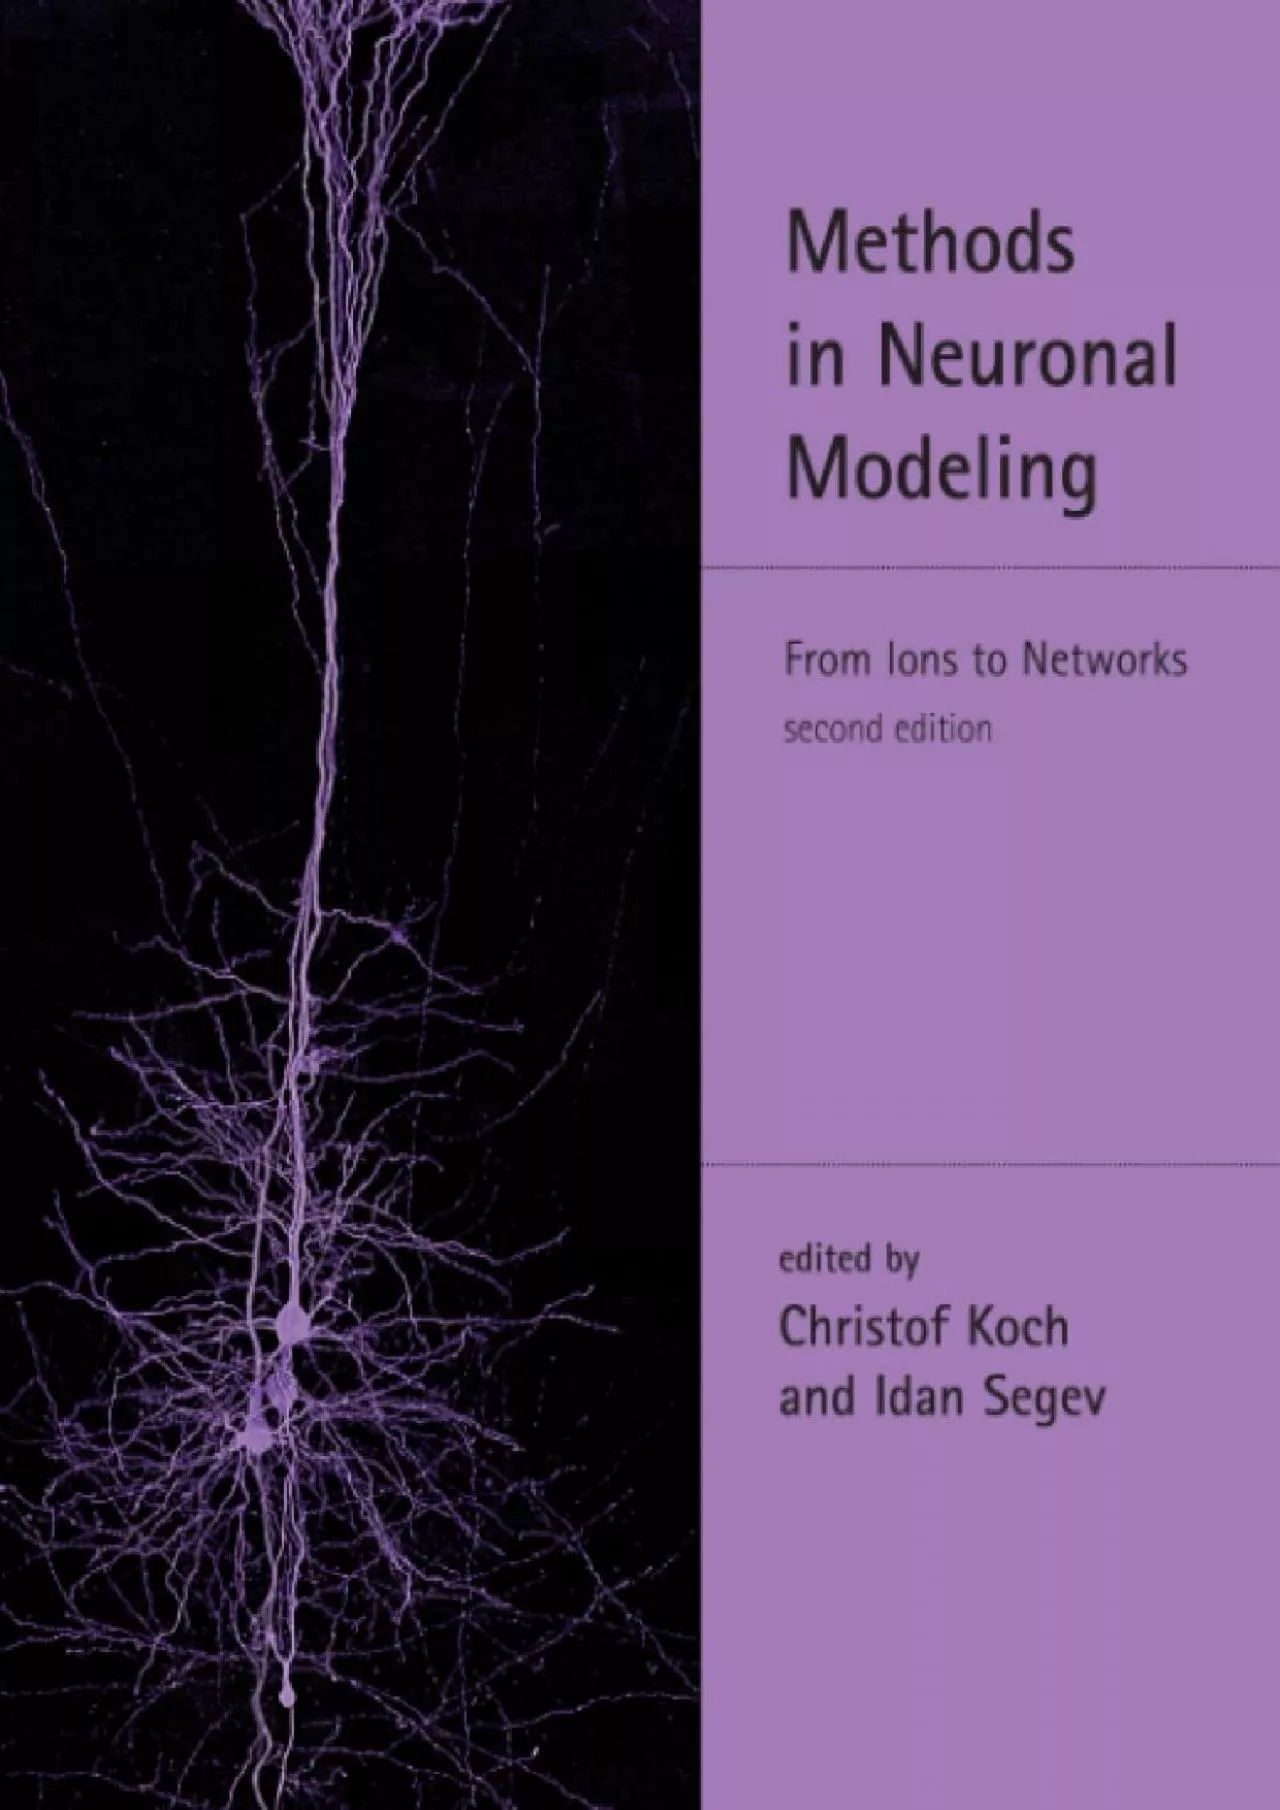 (BOOK)-Methods in Neuronal Modeling, second edition: From Ions to Networks (Computational